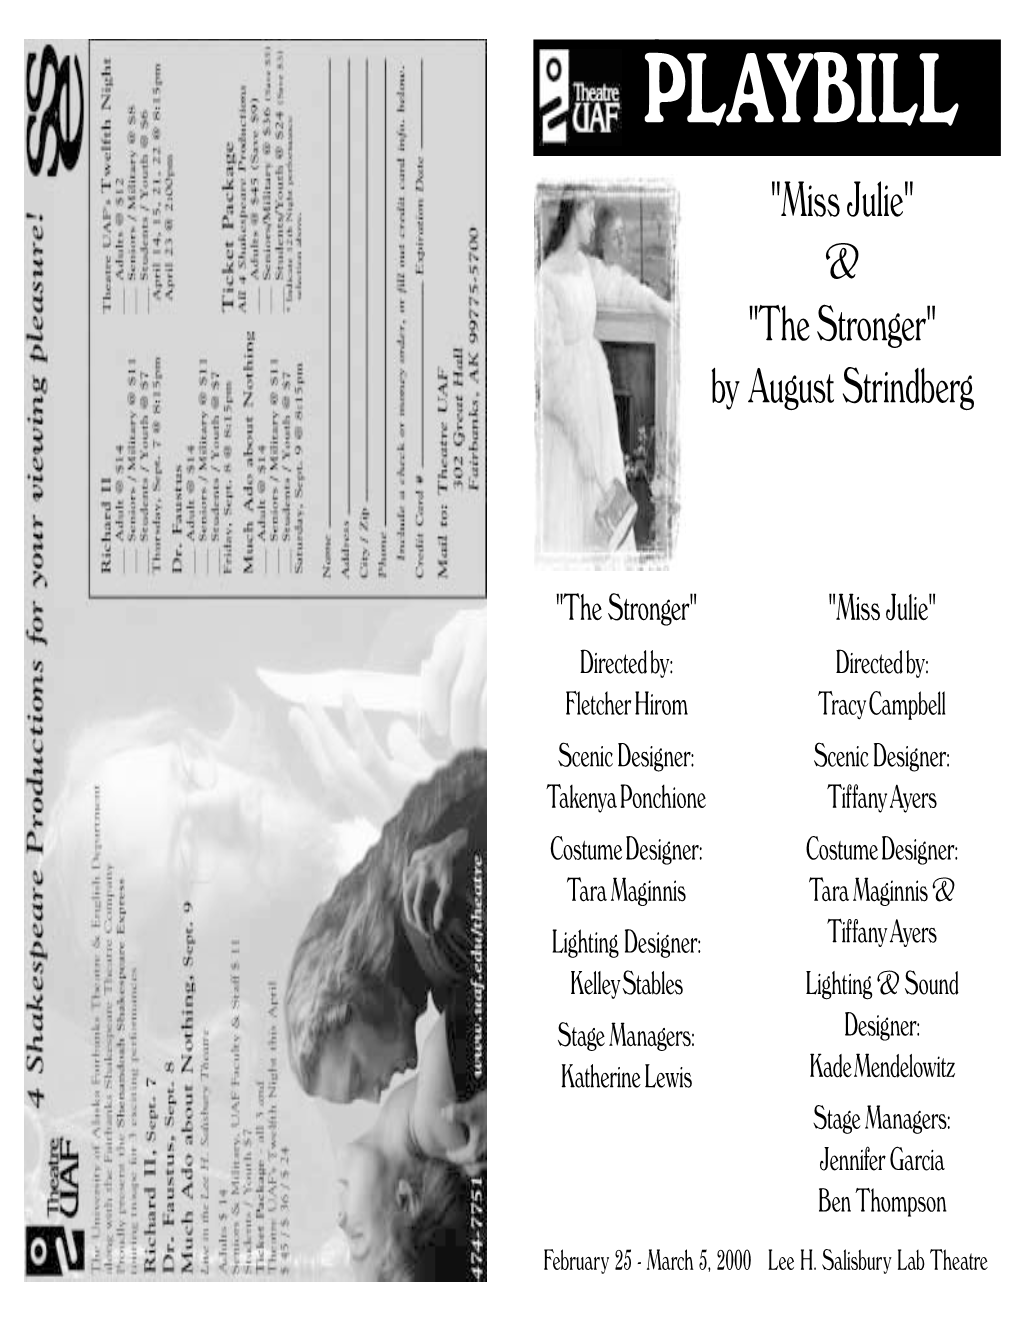 PLAYBILL "Miss Julie" & "The Stronger" by August Strindberg